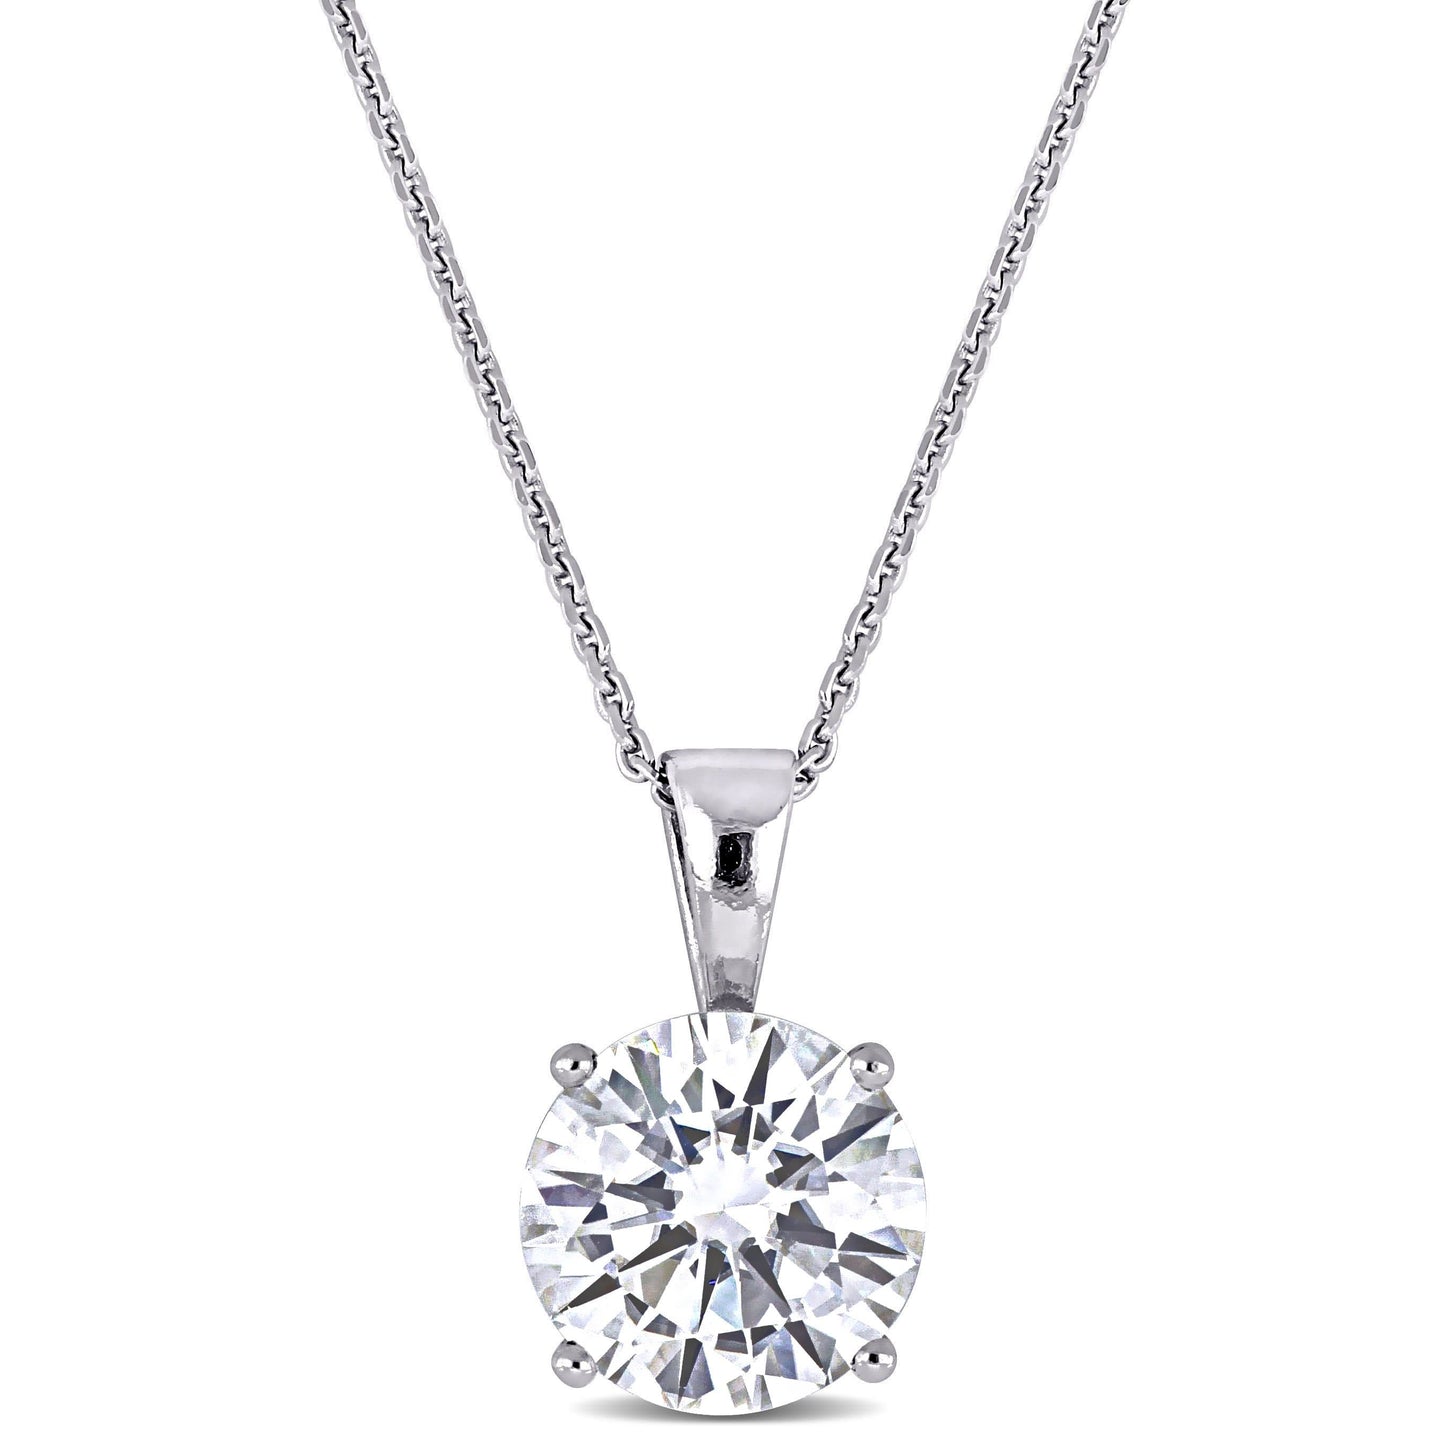 2ct Moissanite Solitaire Necklace in 14 White Gold – IceTrends